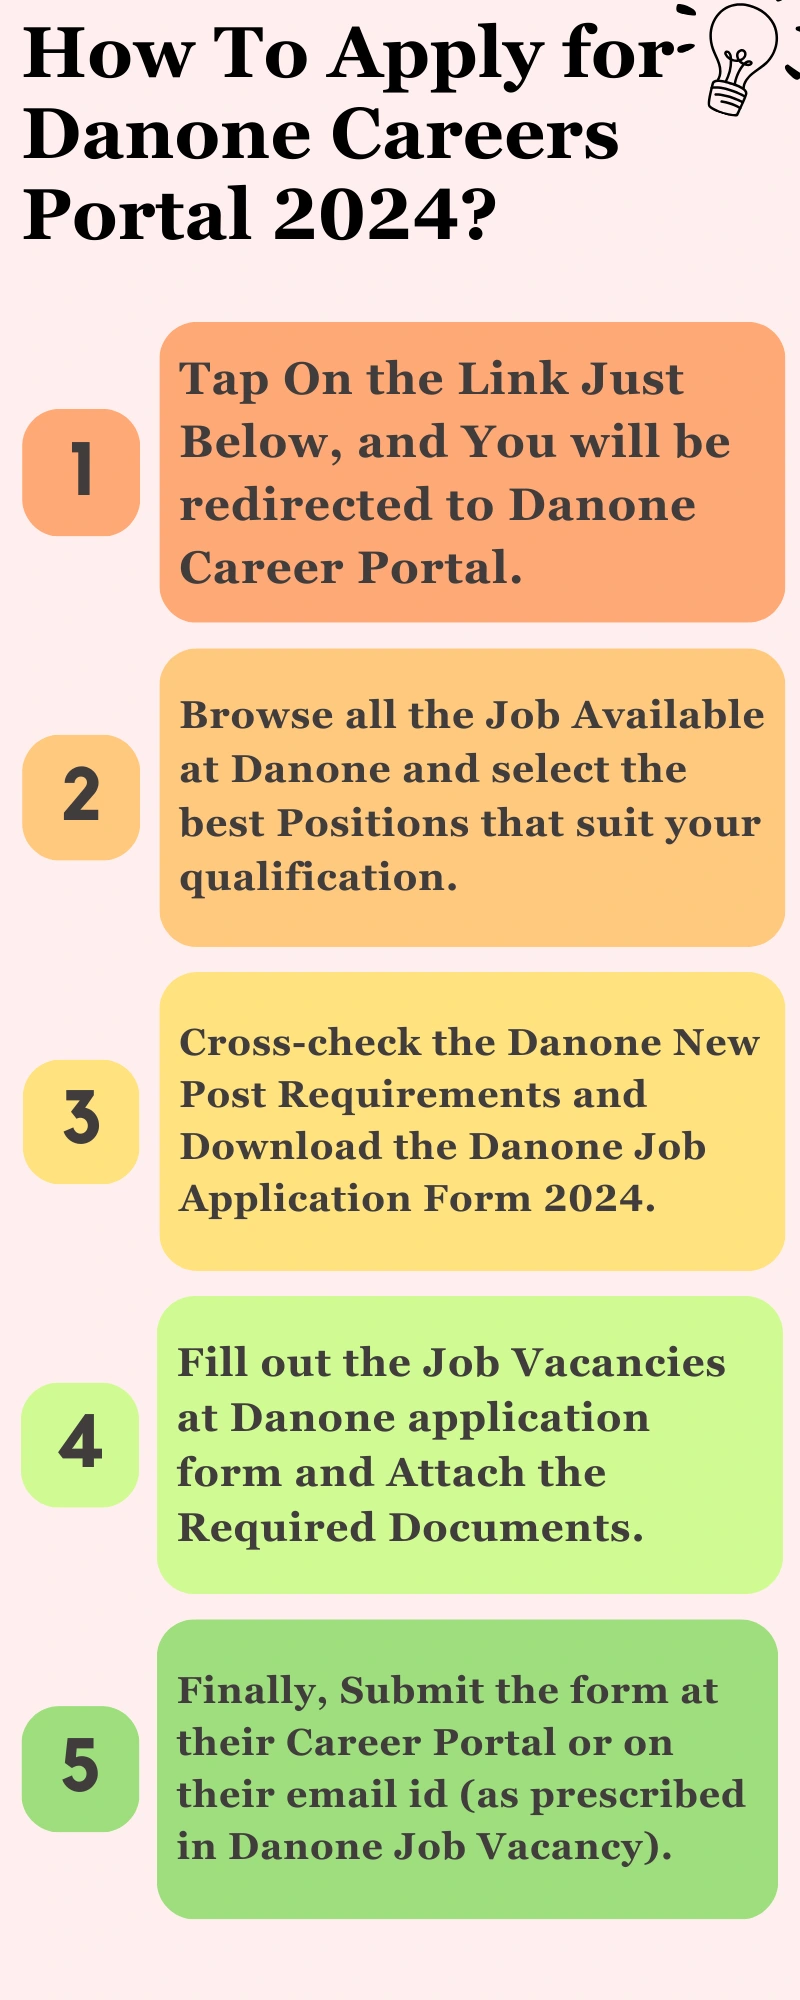 How To Apply for Danone Careers Portal 2024?